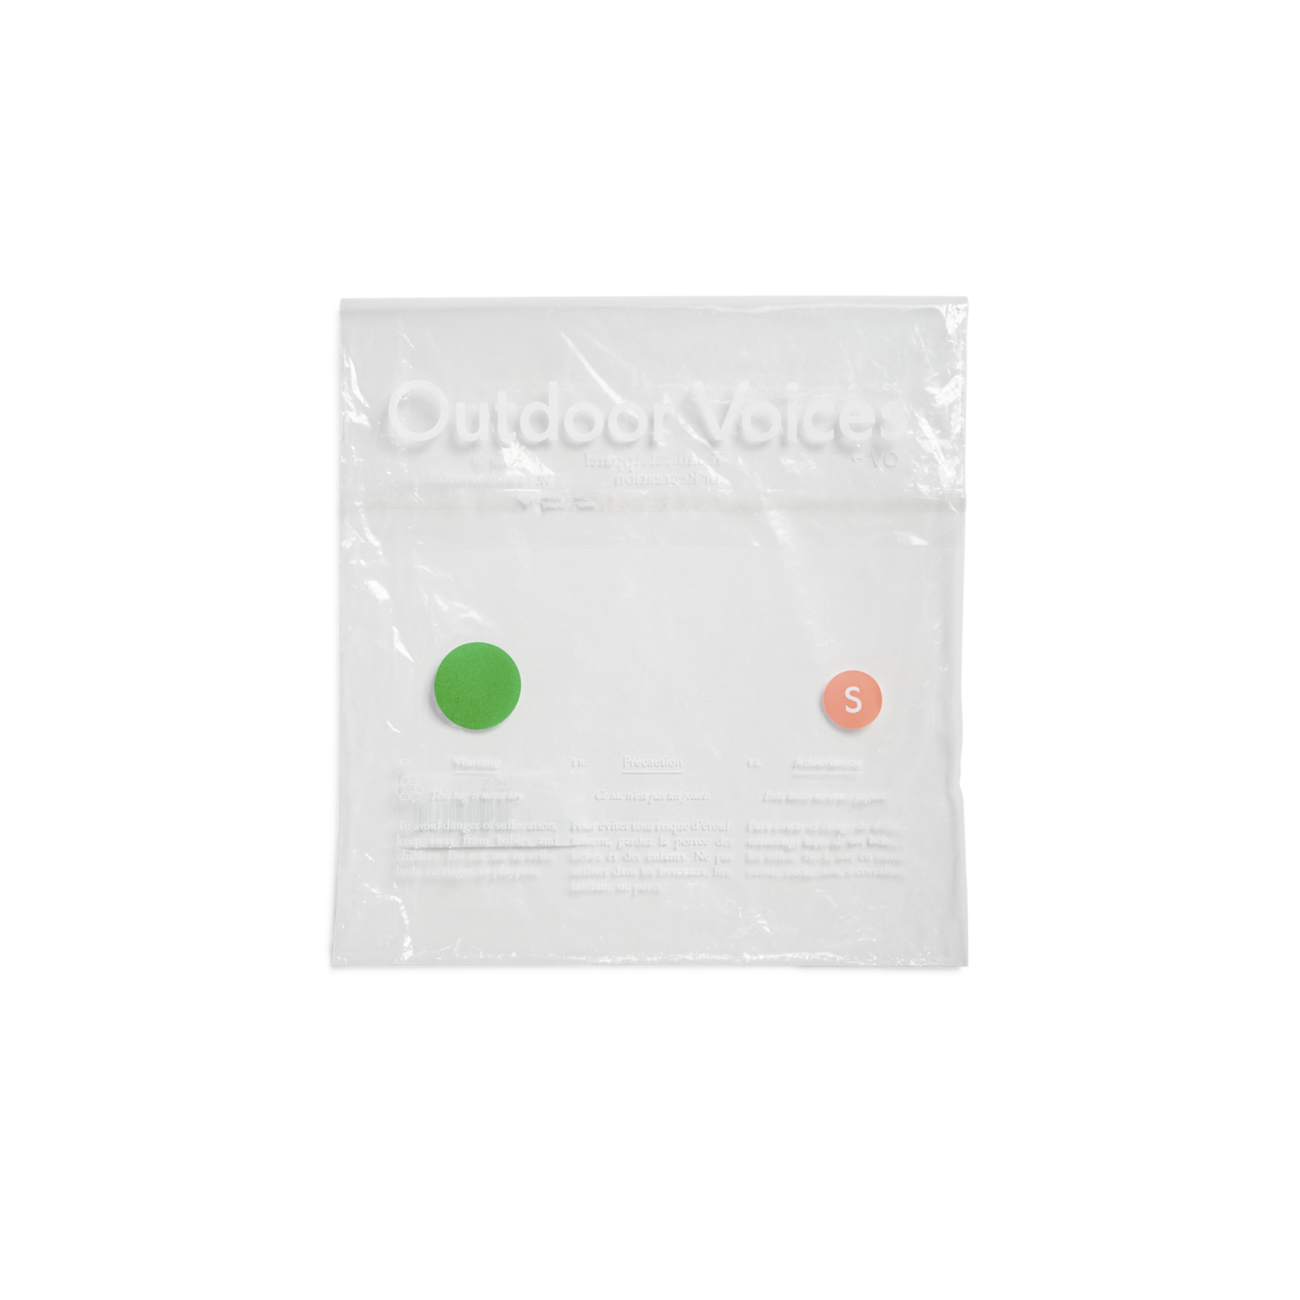 Outdoor Voices stores apparel in ready-to-ship, clear bags that are placed in a kraft mailer for shipping. In storage and in shipping, the bag protects apparel from dirt, liquid, or snags. What every brand can learn from Amazon's Frustration-Free Packaging guidelines